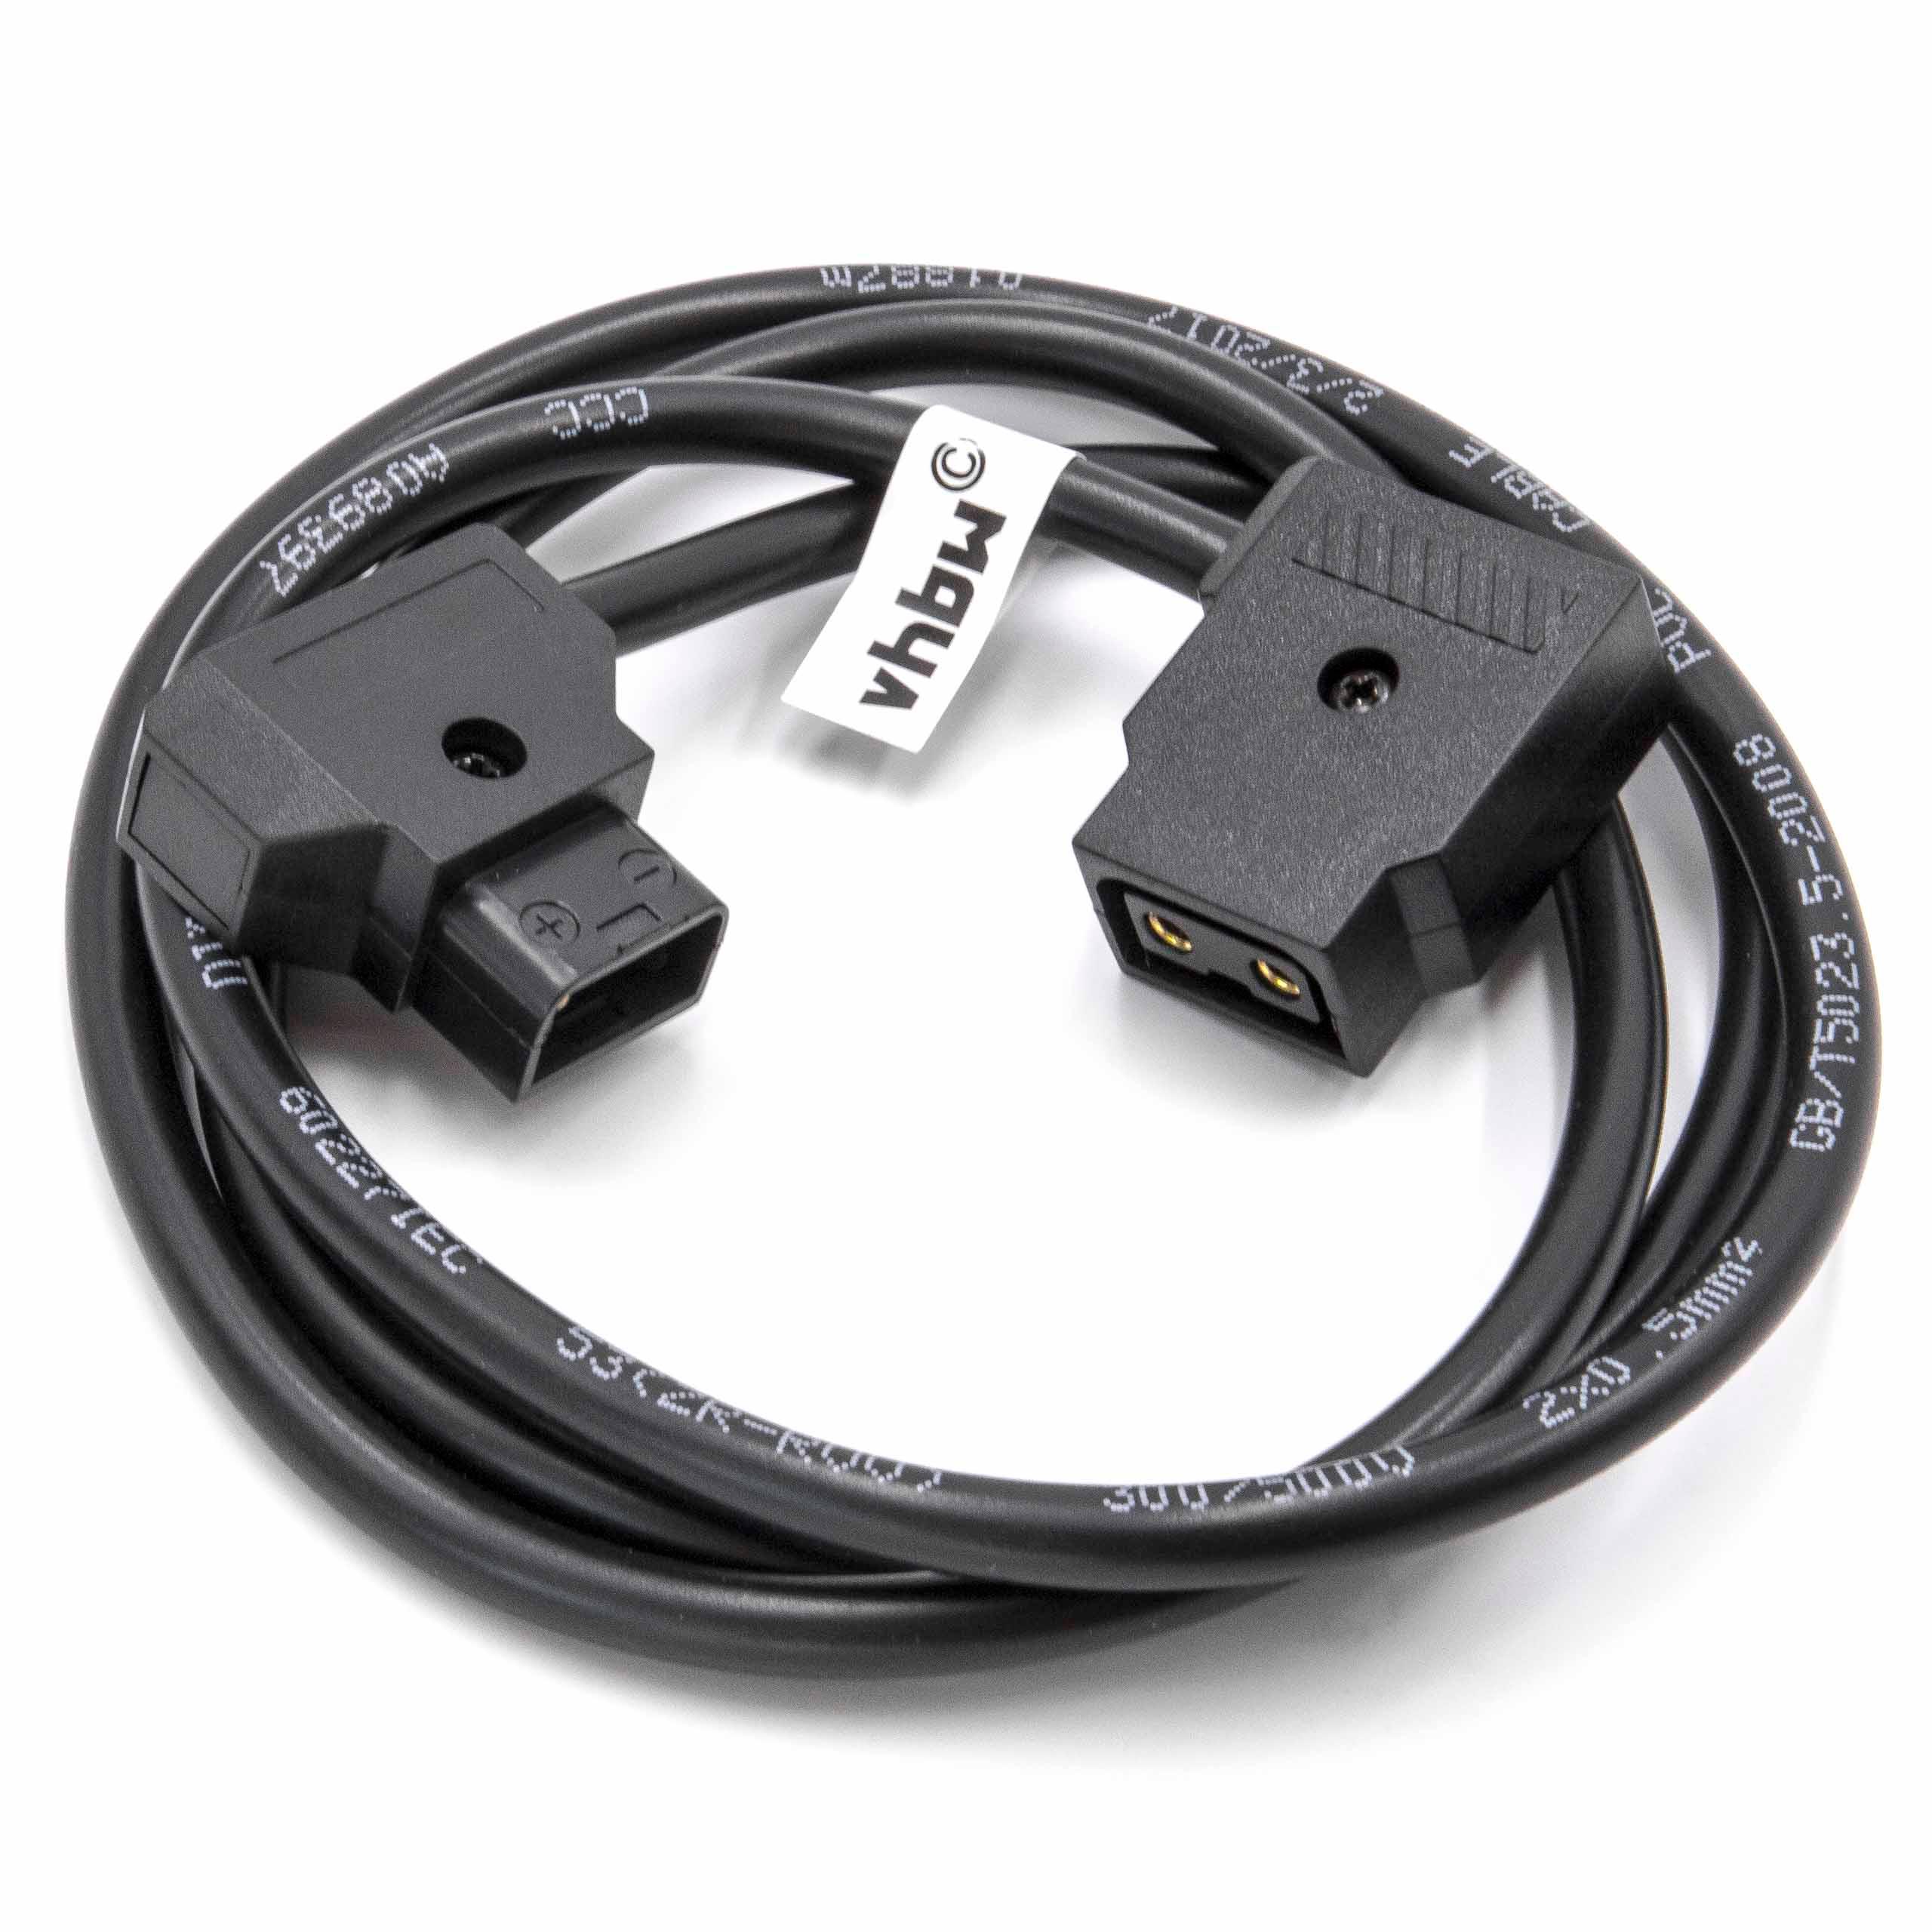 Adapter Cable D-Tap (male) to 1x D-Tap (female) suitable for Anton Bauer D-Tap, Dionic Camera - 1 m Black